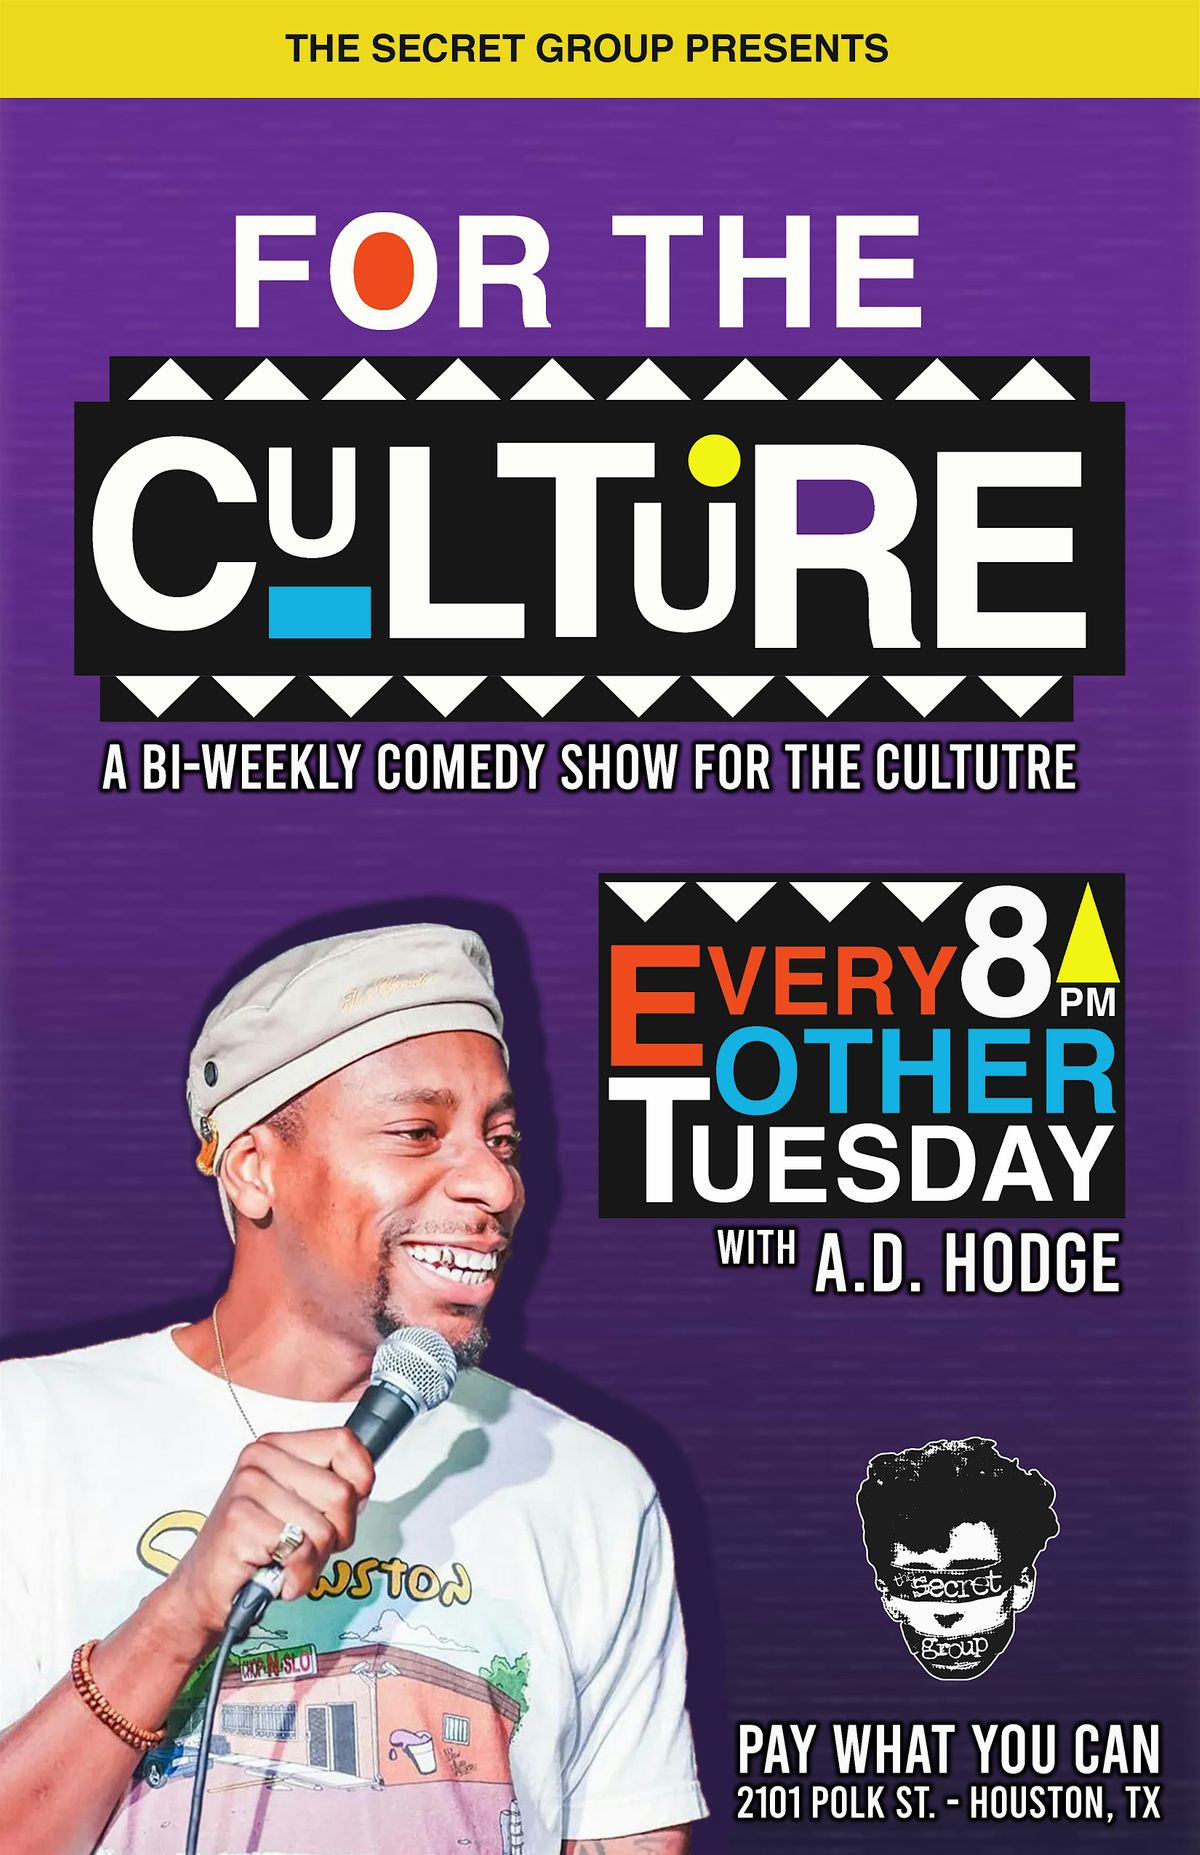 FOR THE CULTURE: A Bi-Weekly Comedy Show for The Culture with A.D. Hodge